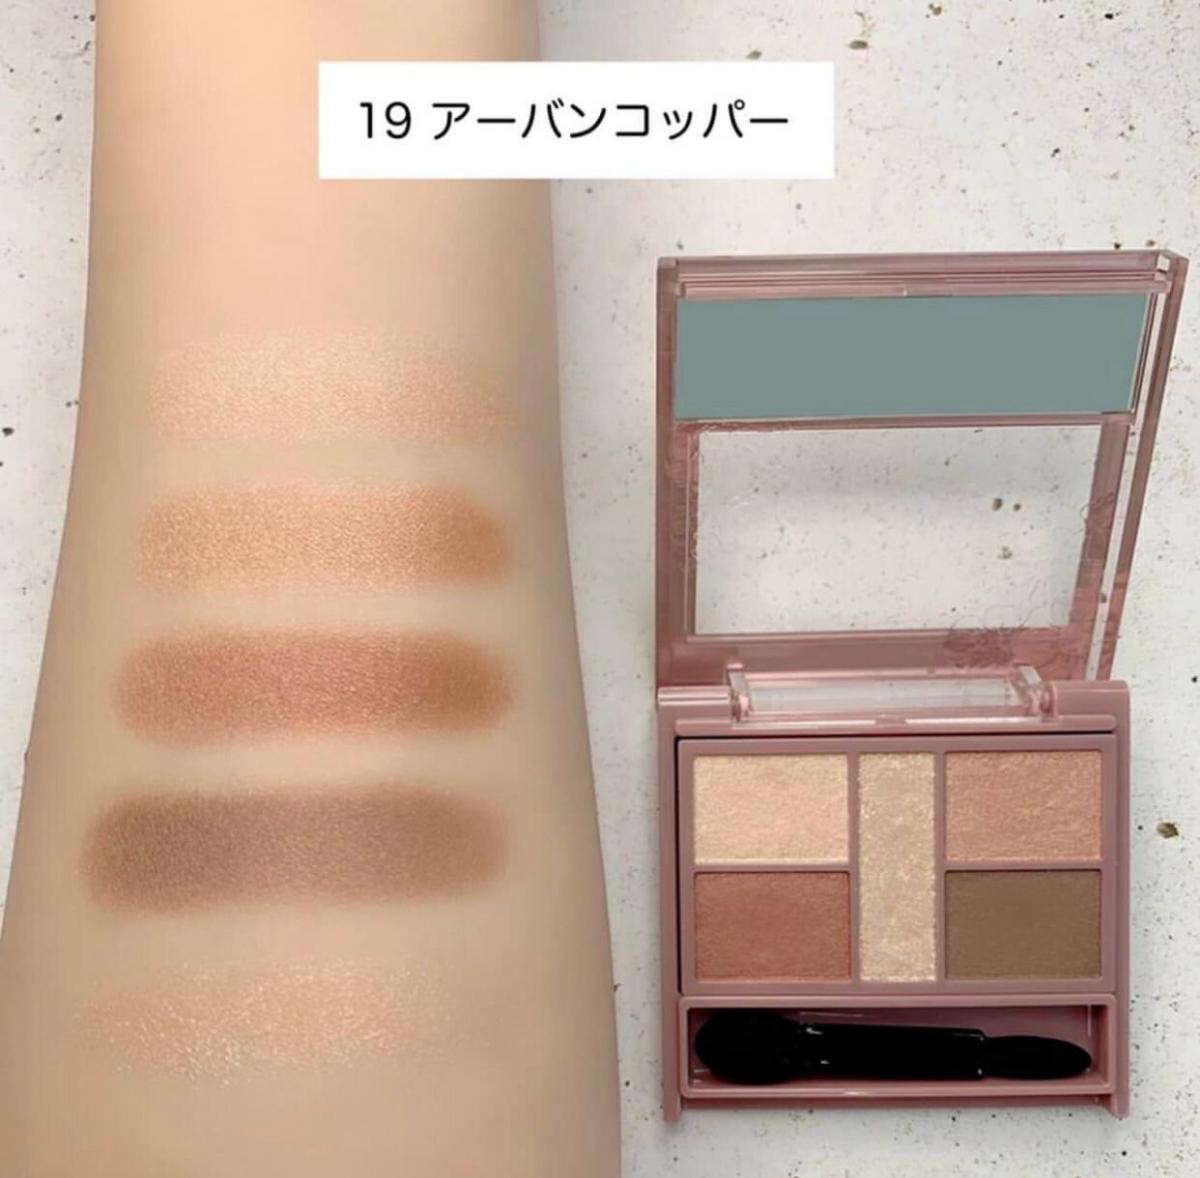 
                  
                    JAPAN CANMAKE Perfect Stylist Eyes Shadow #19 Urban Copper (New Colour)
                  
                